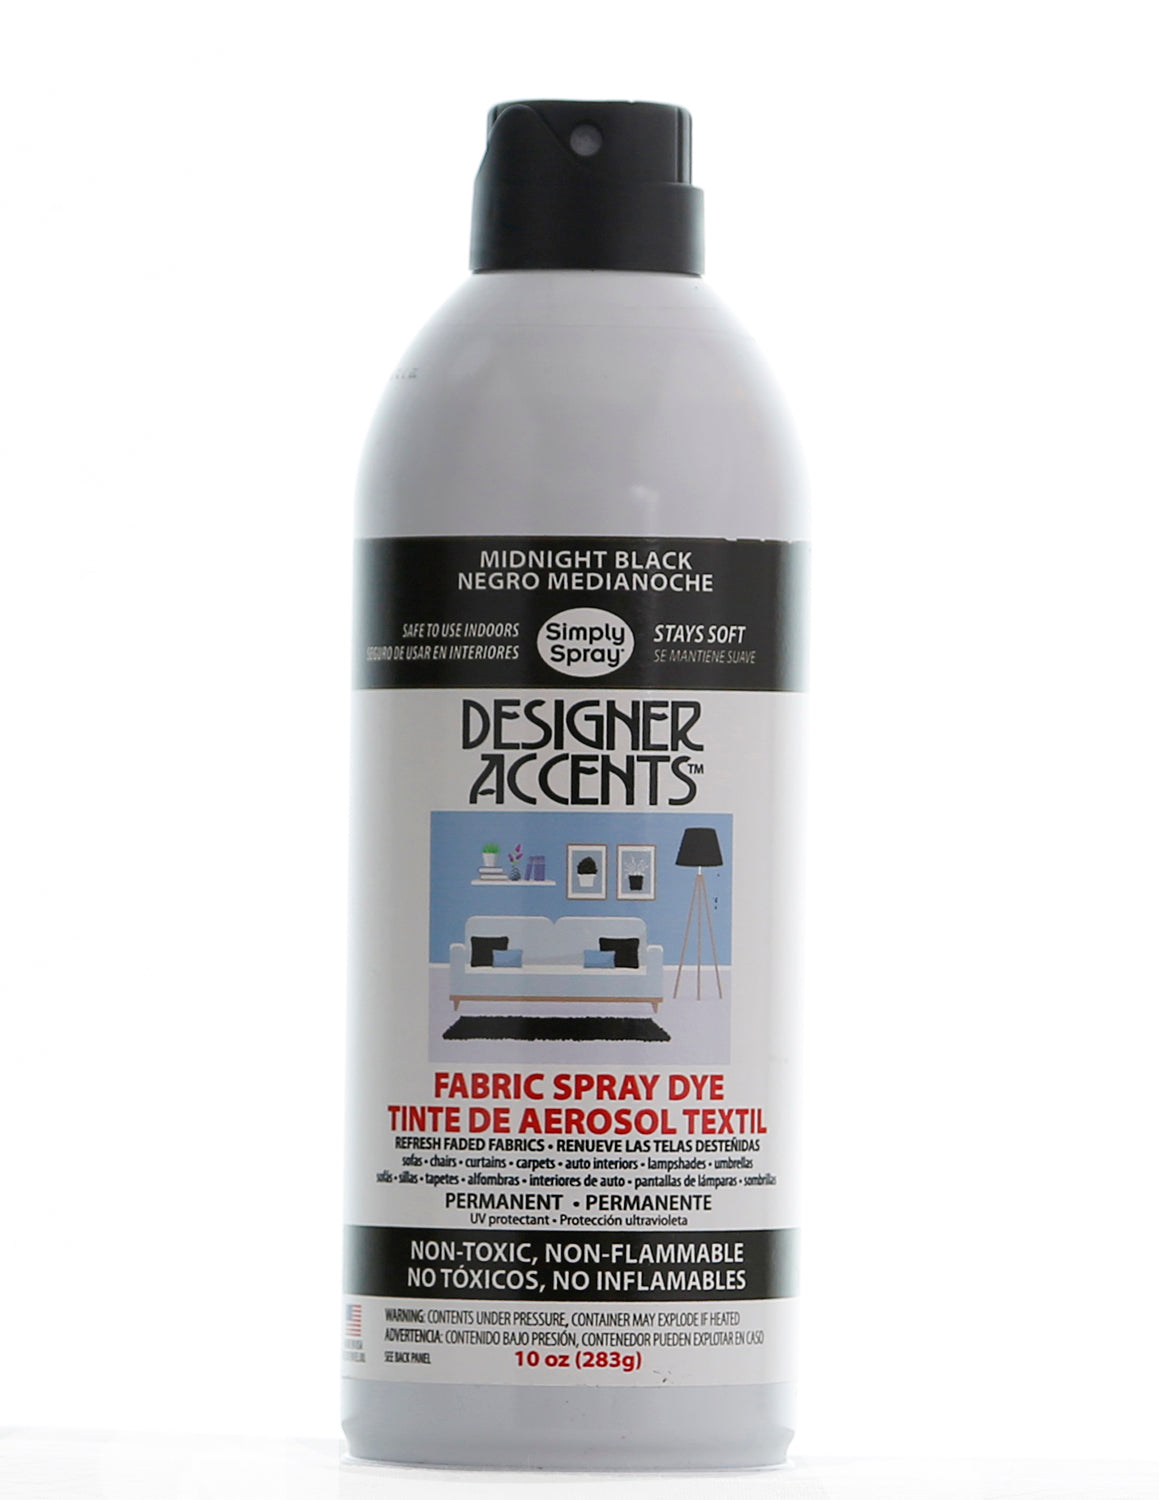 Designer Accents Fabric Paint Spray Dye by Simply Spray - Black